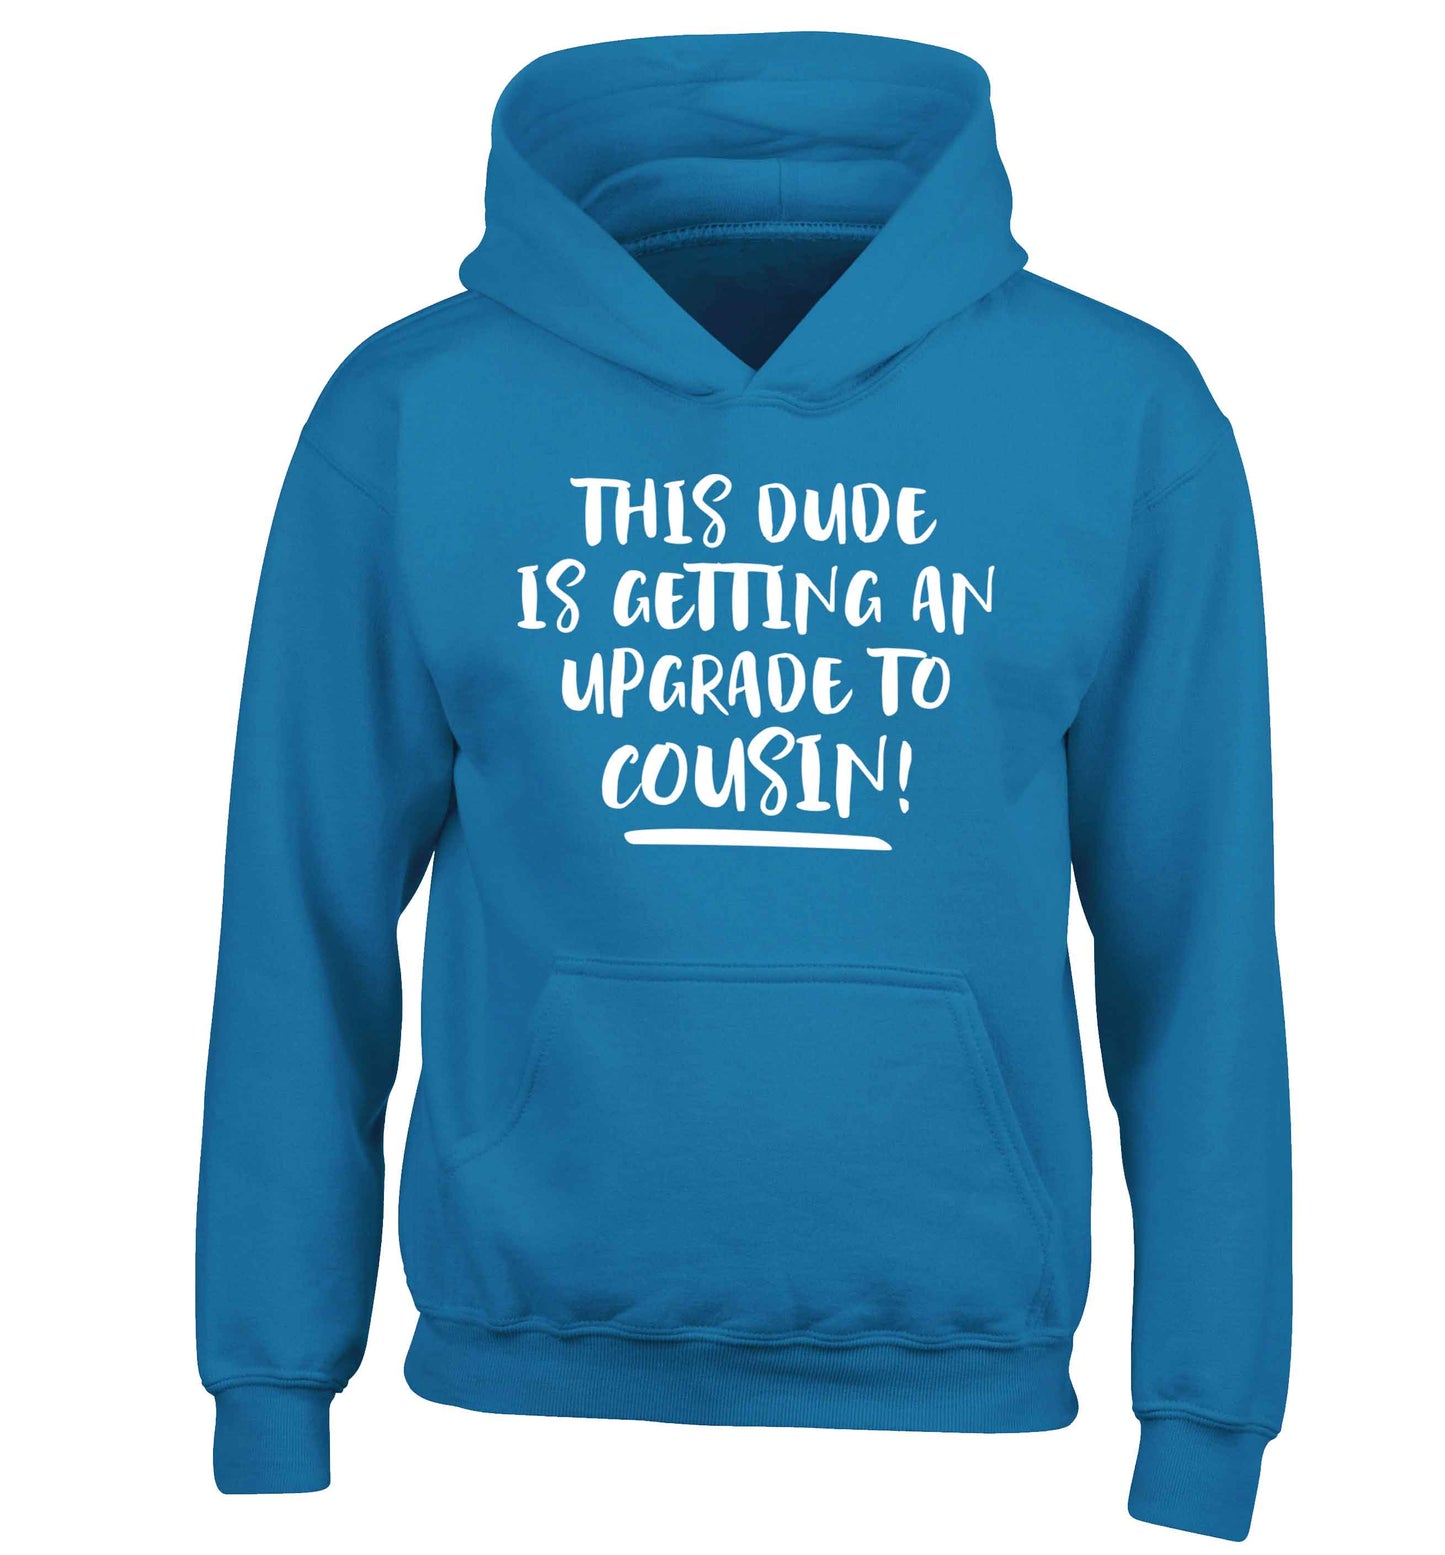 This dude is getting an upgrade to cousin! children's blue hoodie 12-13 Years